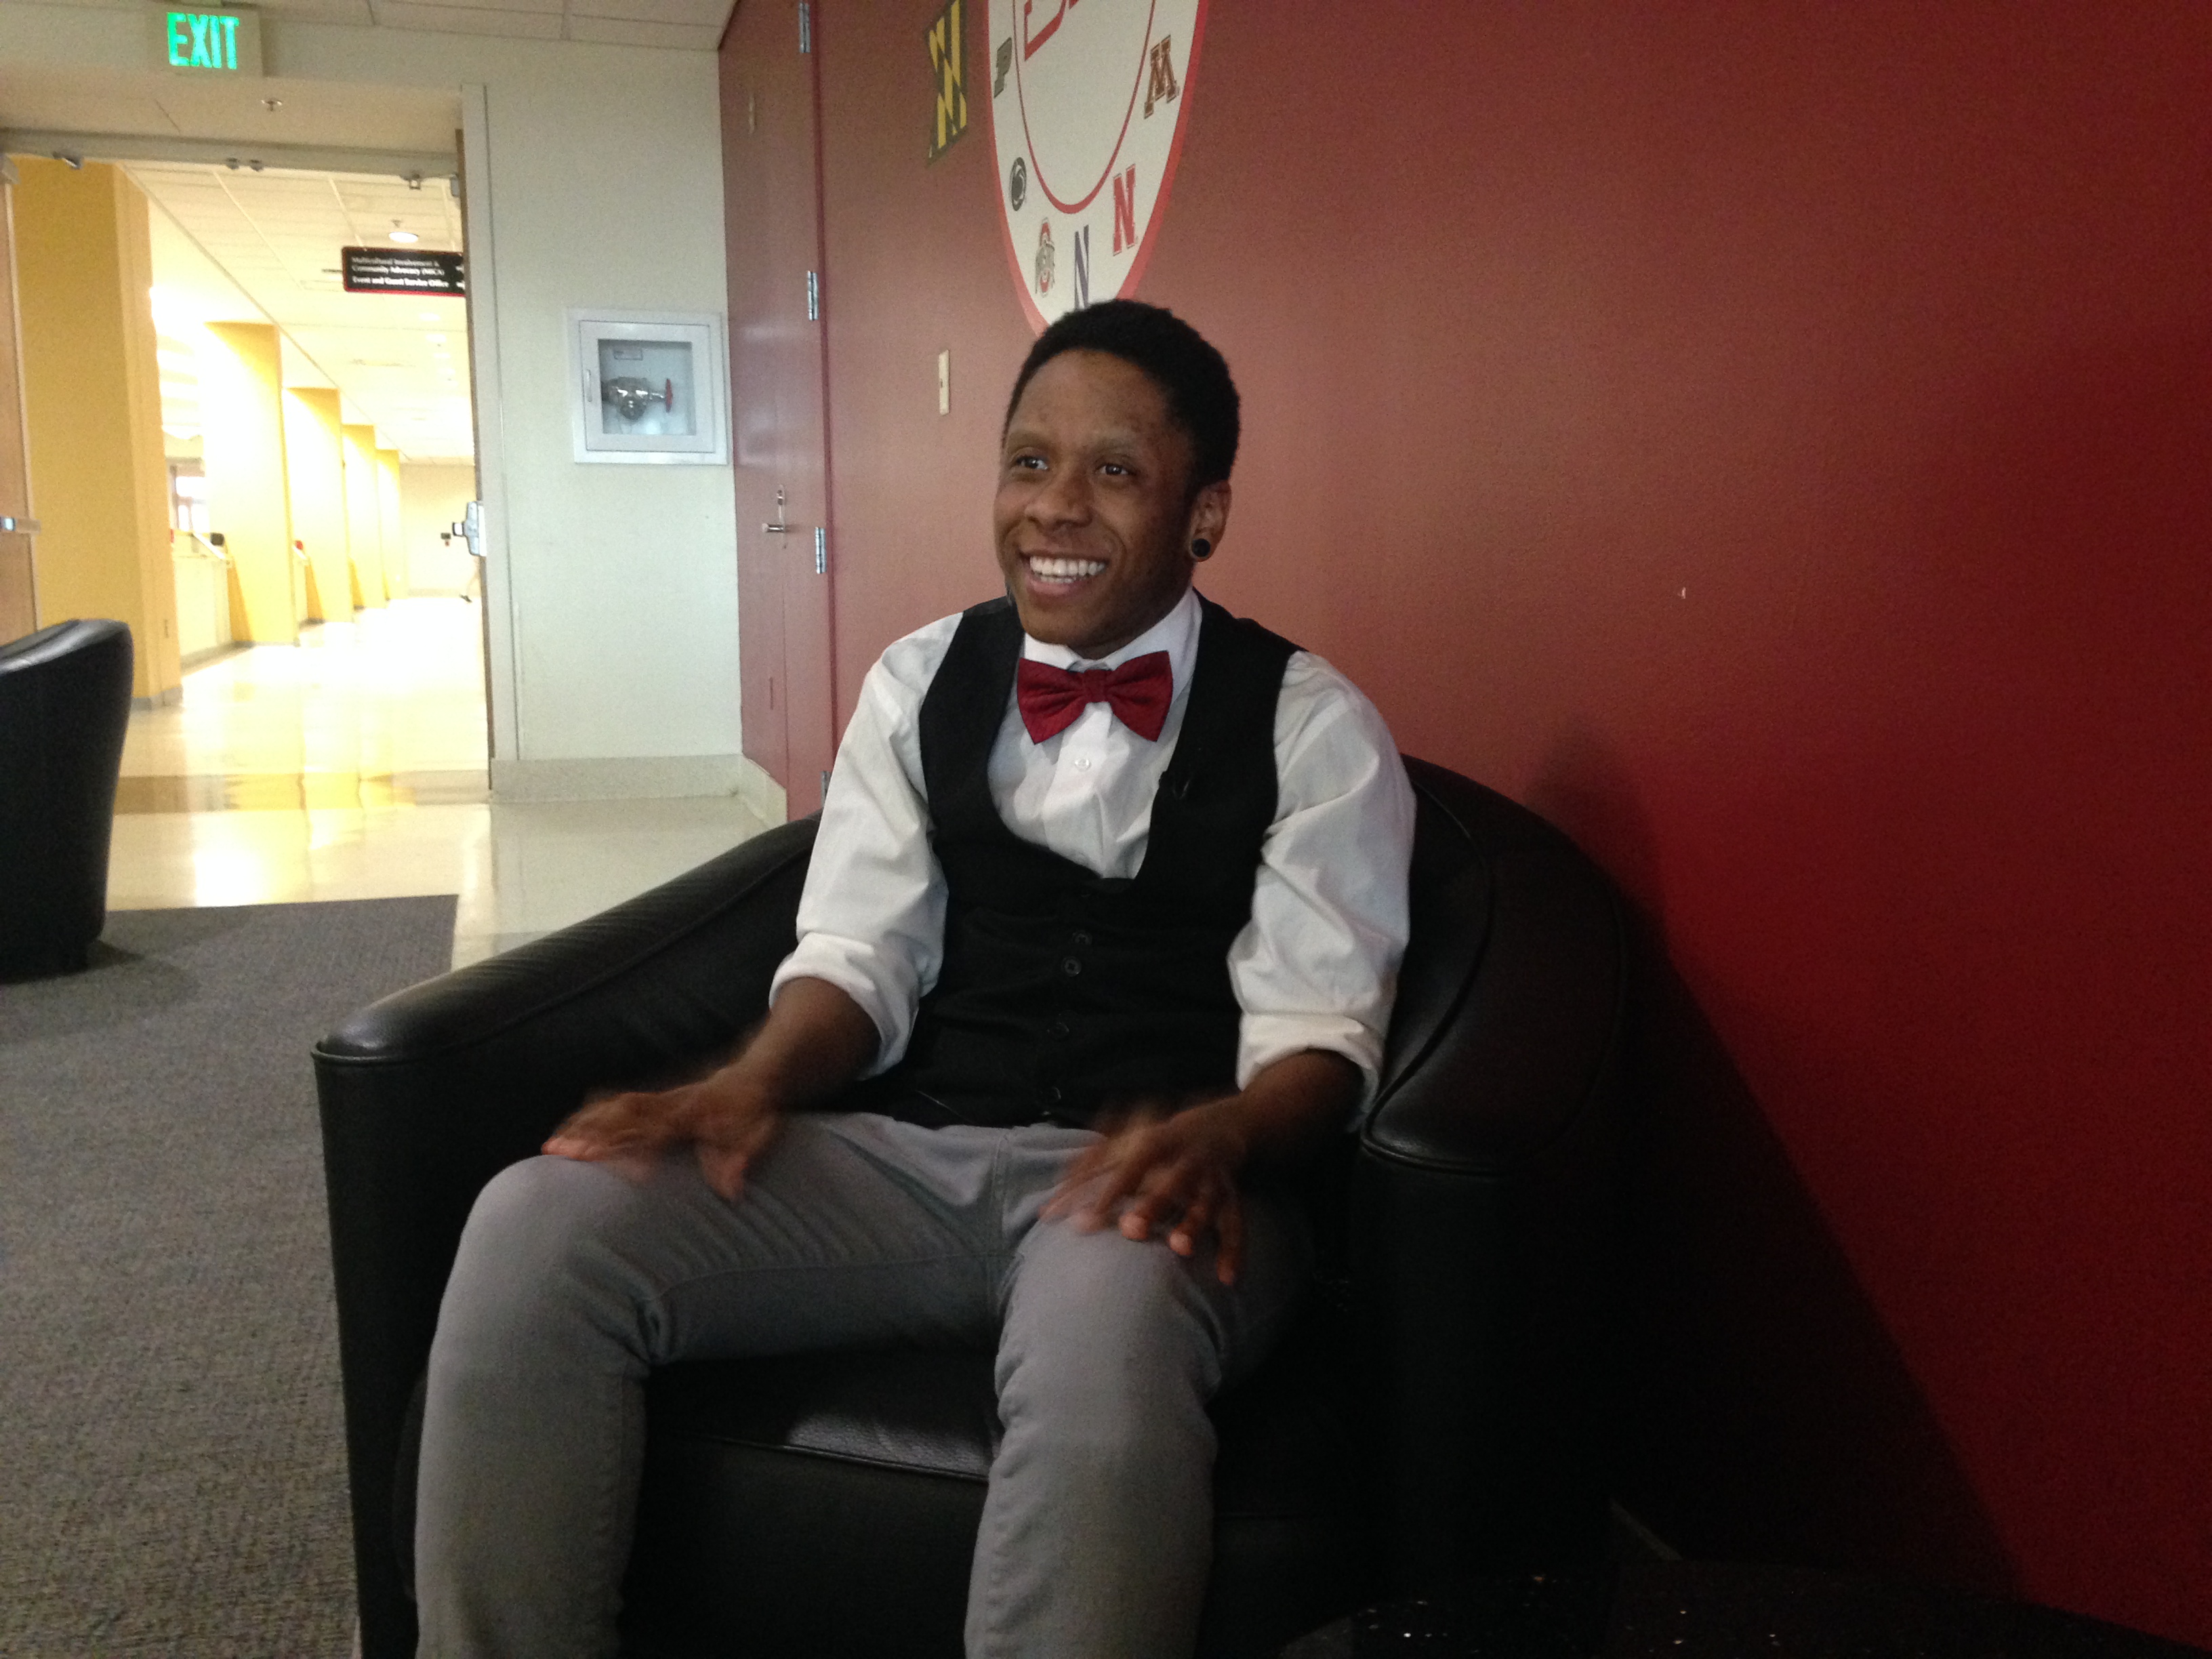 Mykell Hatcher-McLarin, 22, sits in the University of Maryland’s student union where he is working to complete his sociology degree. The university, he said, was pretty accepting of him as a transgender individual, but it’s not as easy in the real world, especially applying for jobs. Capital News Service photo by Grace Toohey.